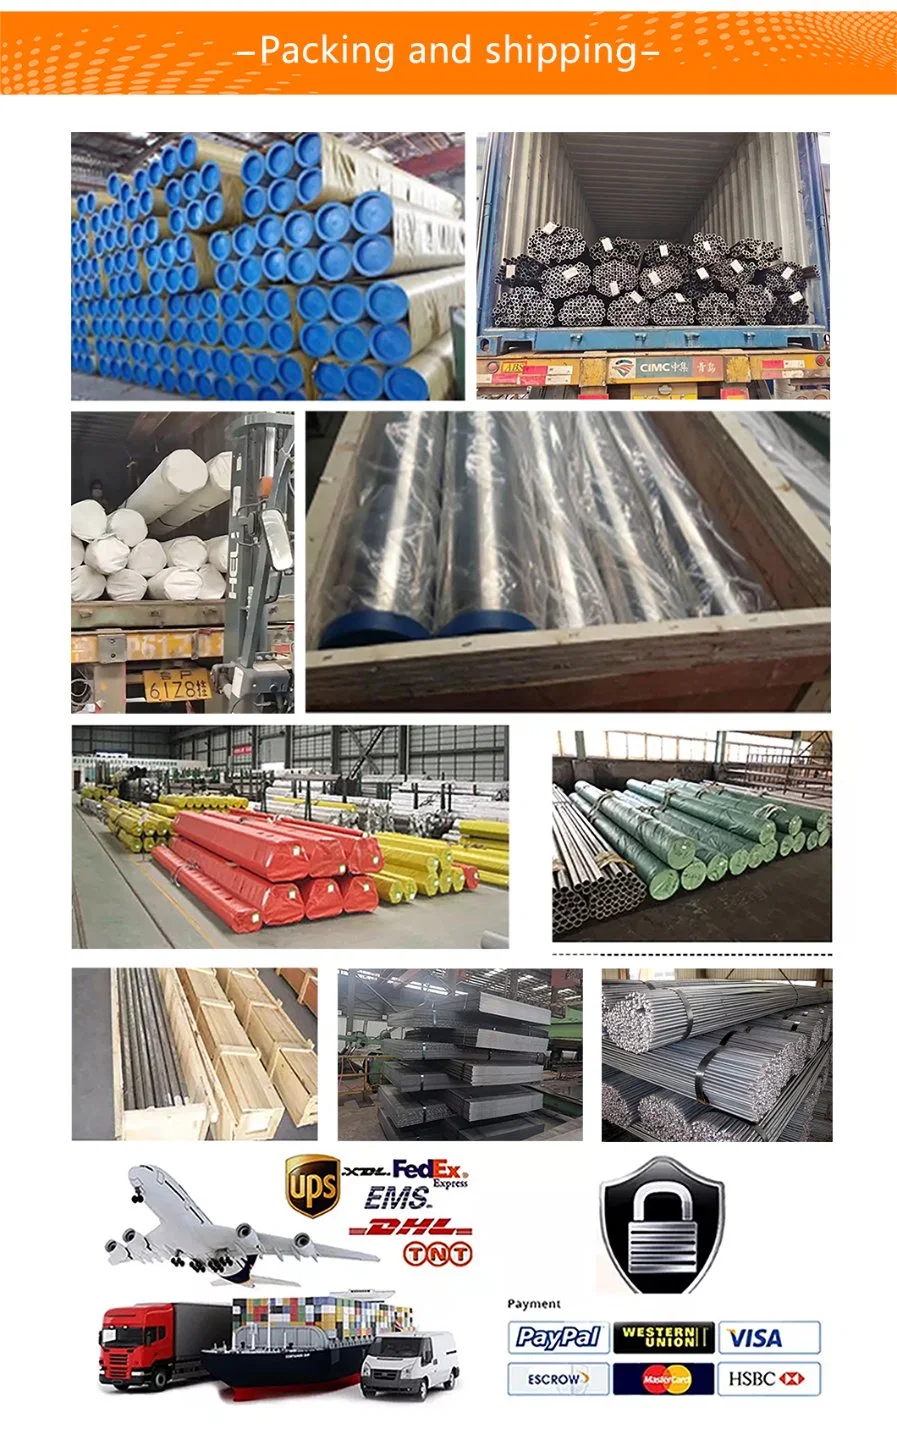 Steel Mills Supply High-Quality Carbon Steel Round Bar High Tensile Steel Round Bar Building Construction Material